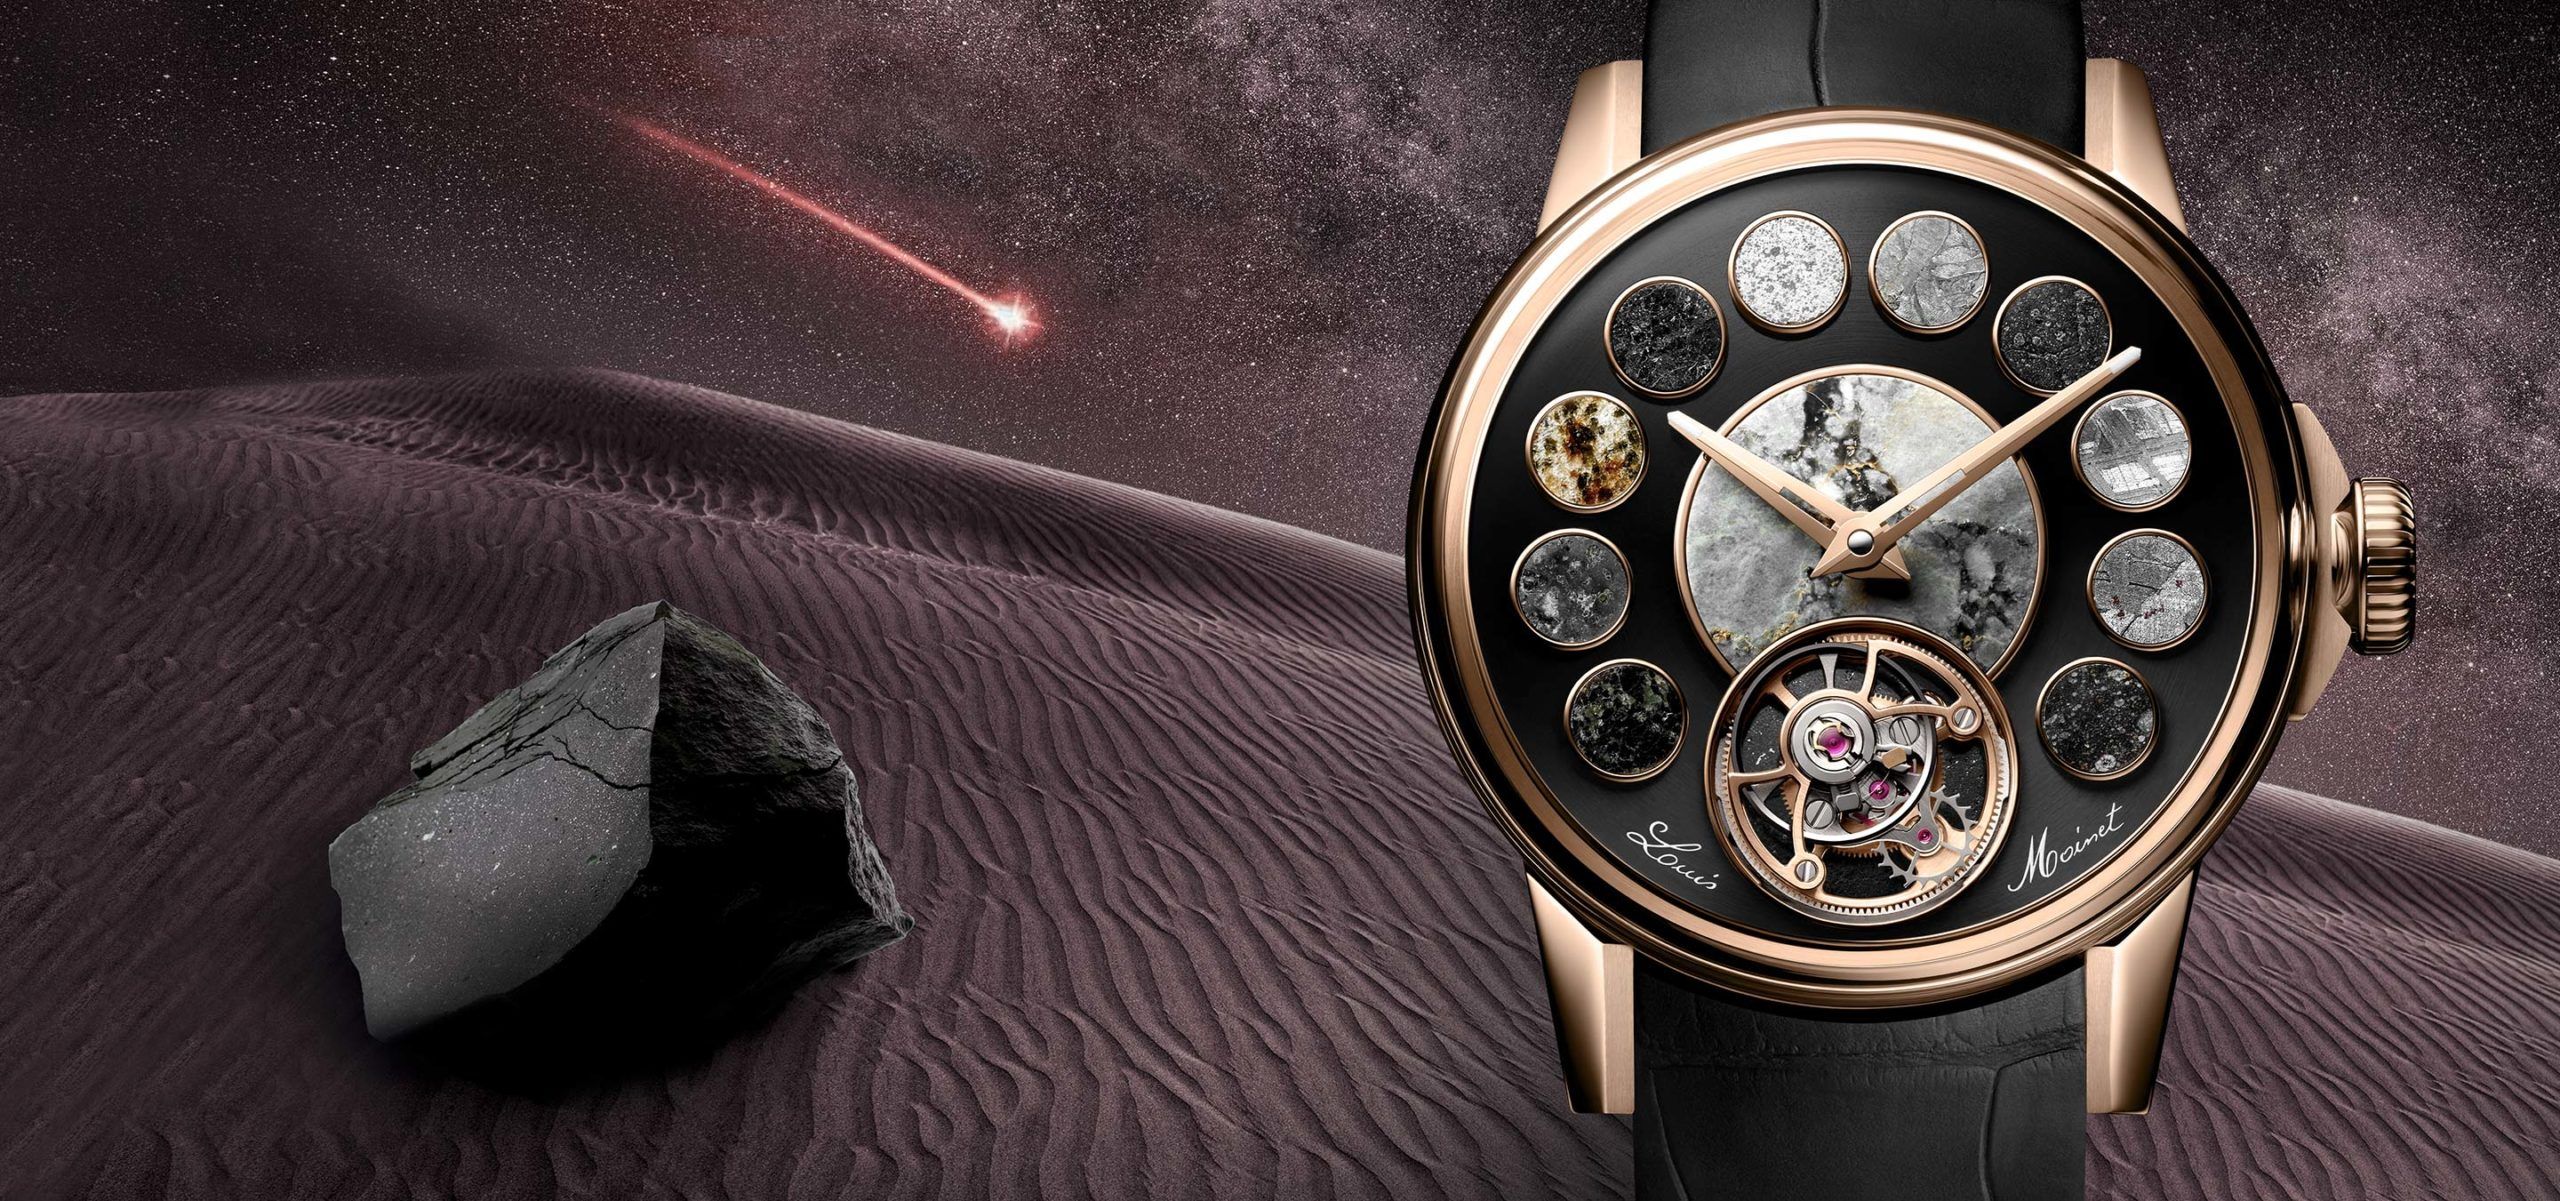 Louis Moinet Cosmopolis Sets Guinness World Record For The Maximum Number Of Meteorite Fragments On A Watch Dial